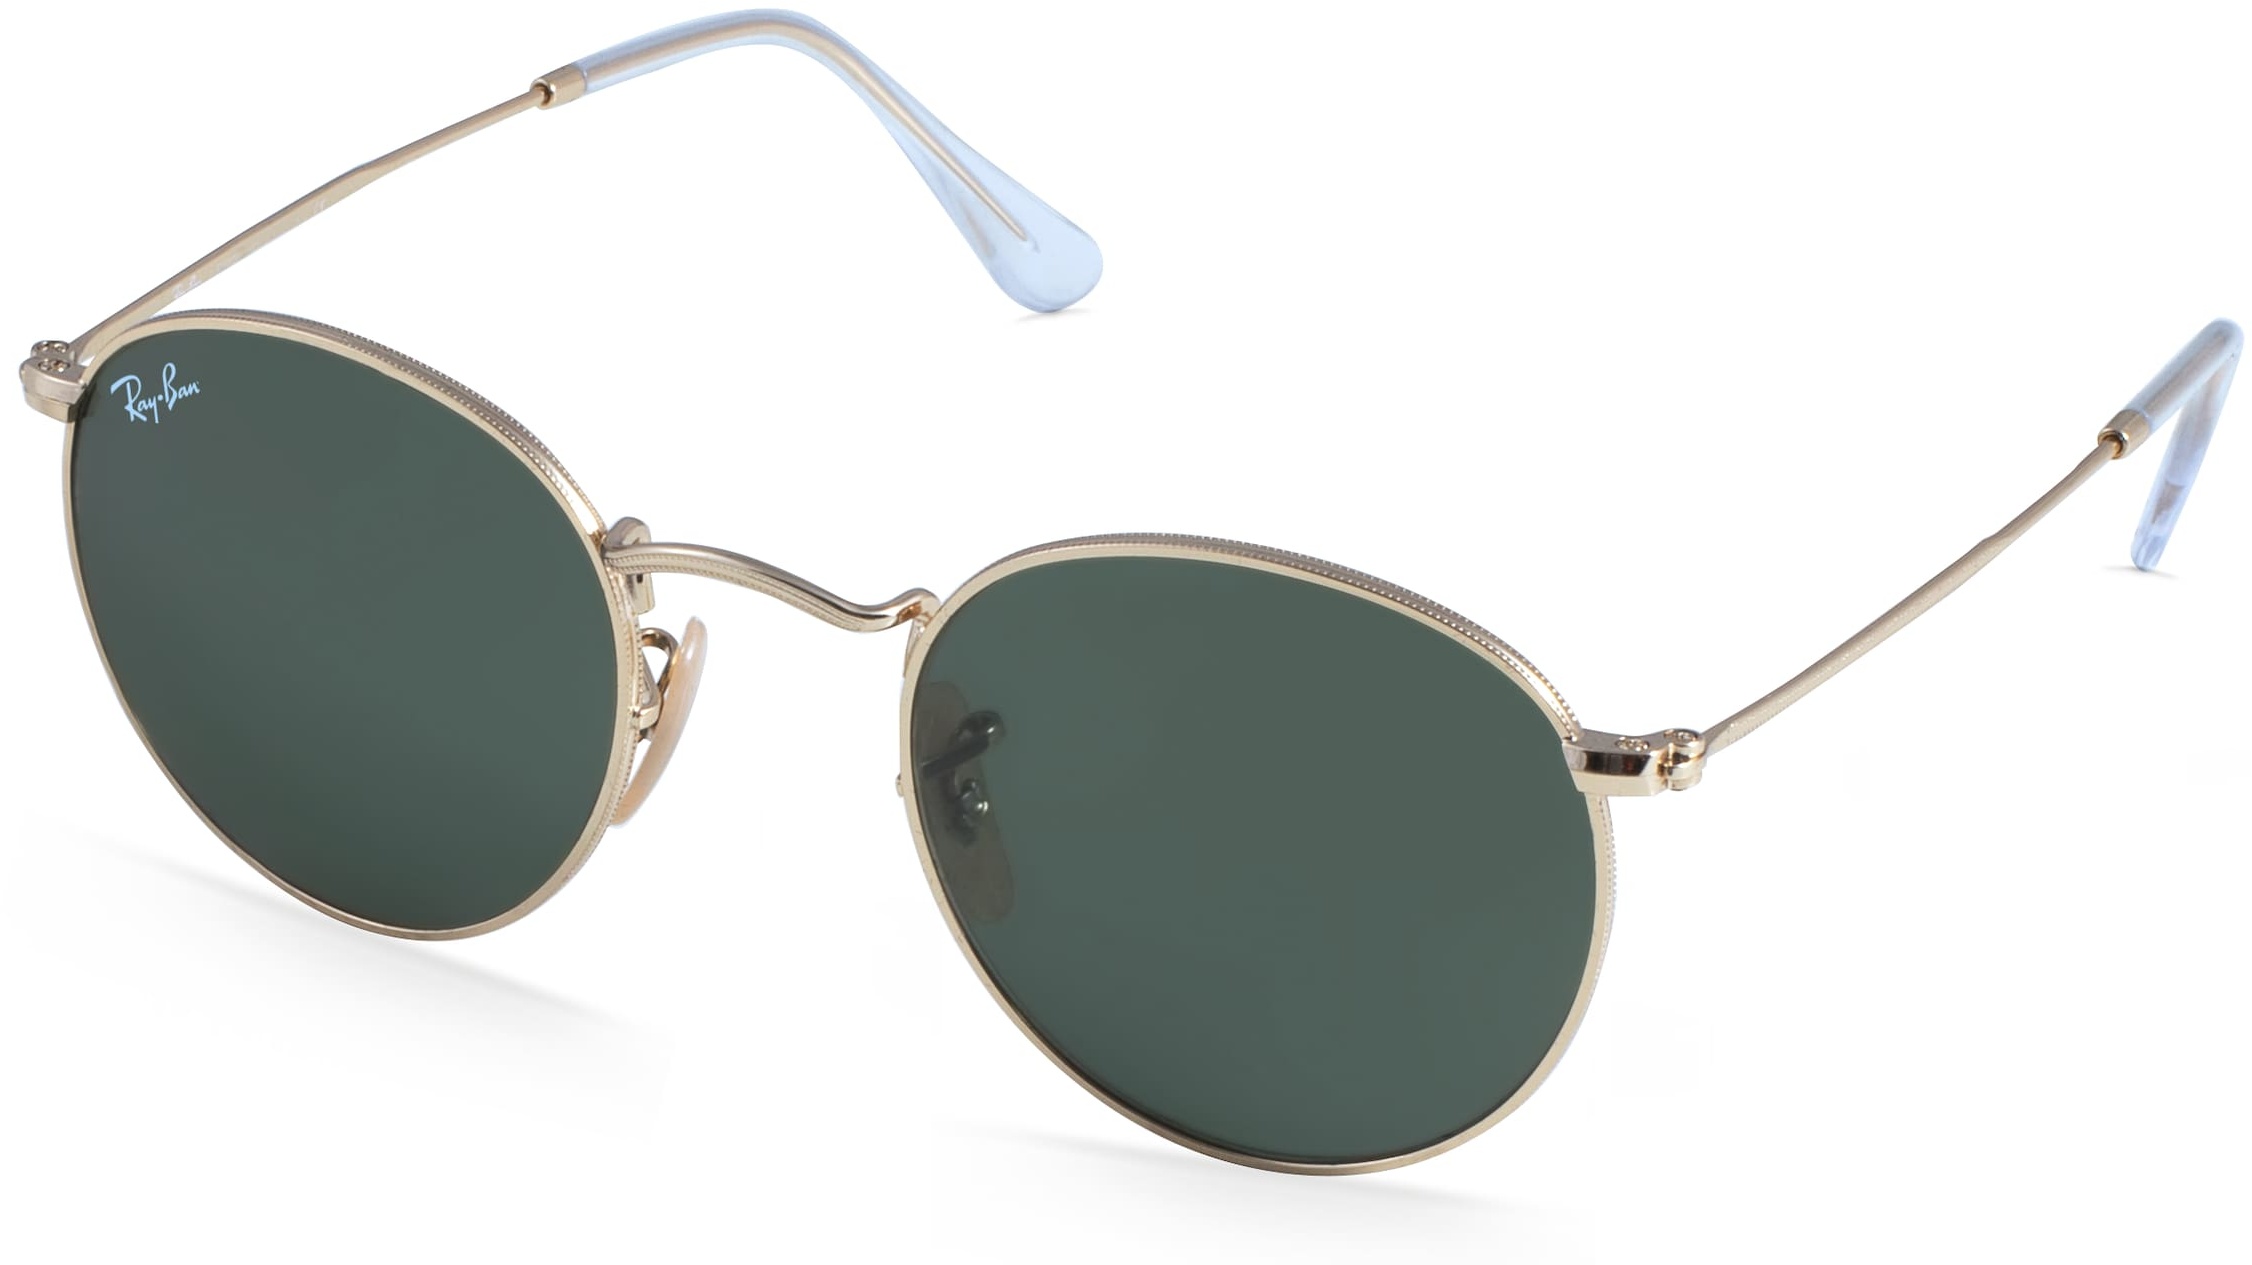 Ray-Ban RB 3447 ROUND METAL Unisex-Sonnenbrille Vollrand Panto Metall-Gestell, gold